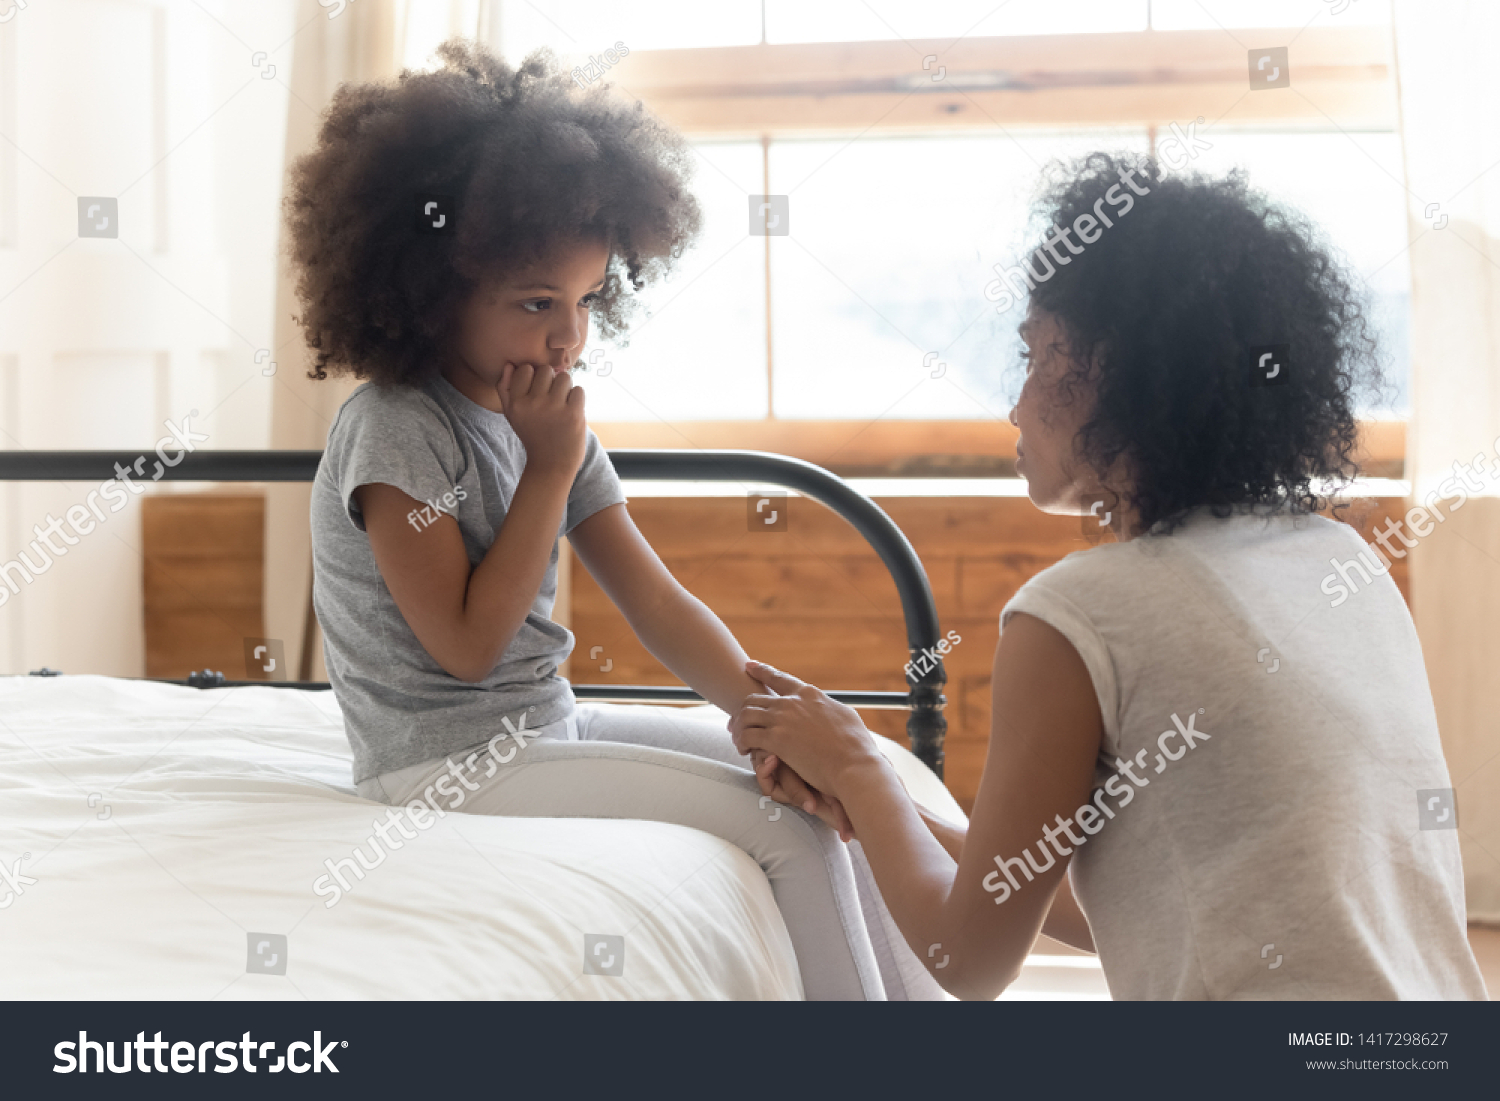 Caring worried african american mother holding hand of sad little mixed race daughter talking giving support and comfort, black mom foster parent consoling small kid being bullied sit on bed at home #1417298627